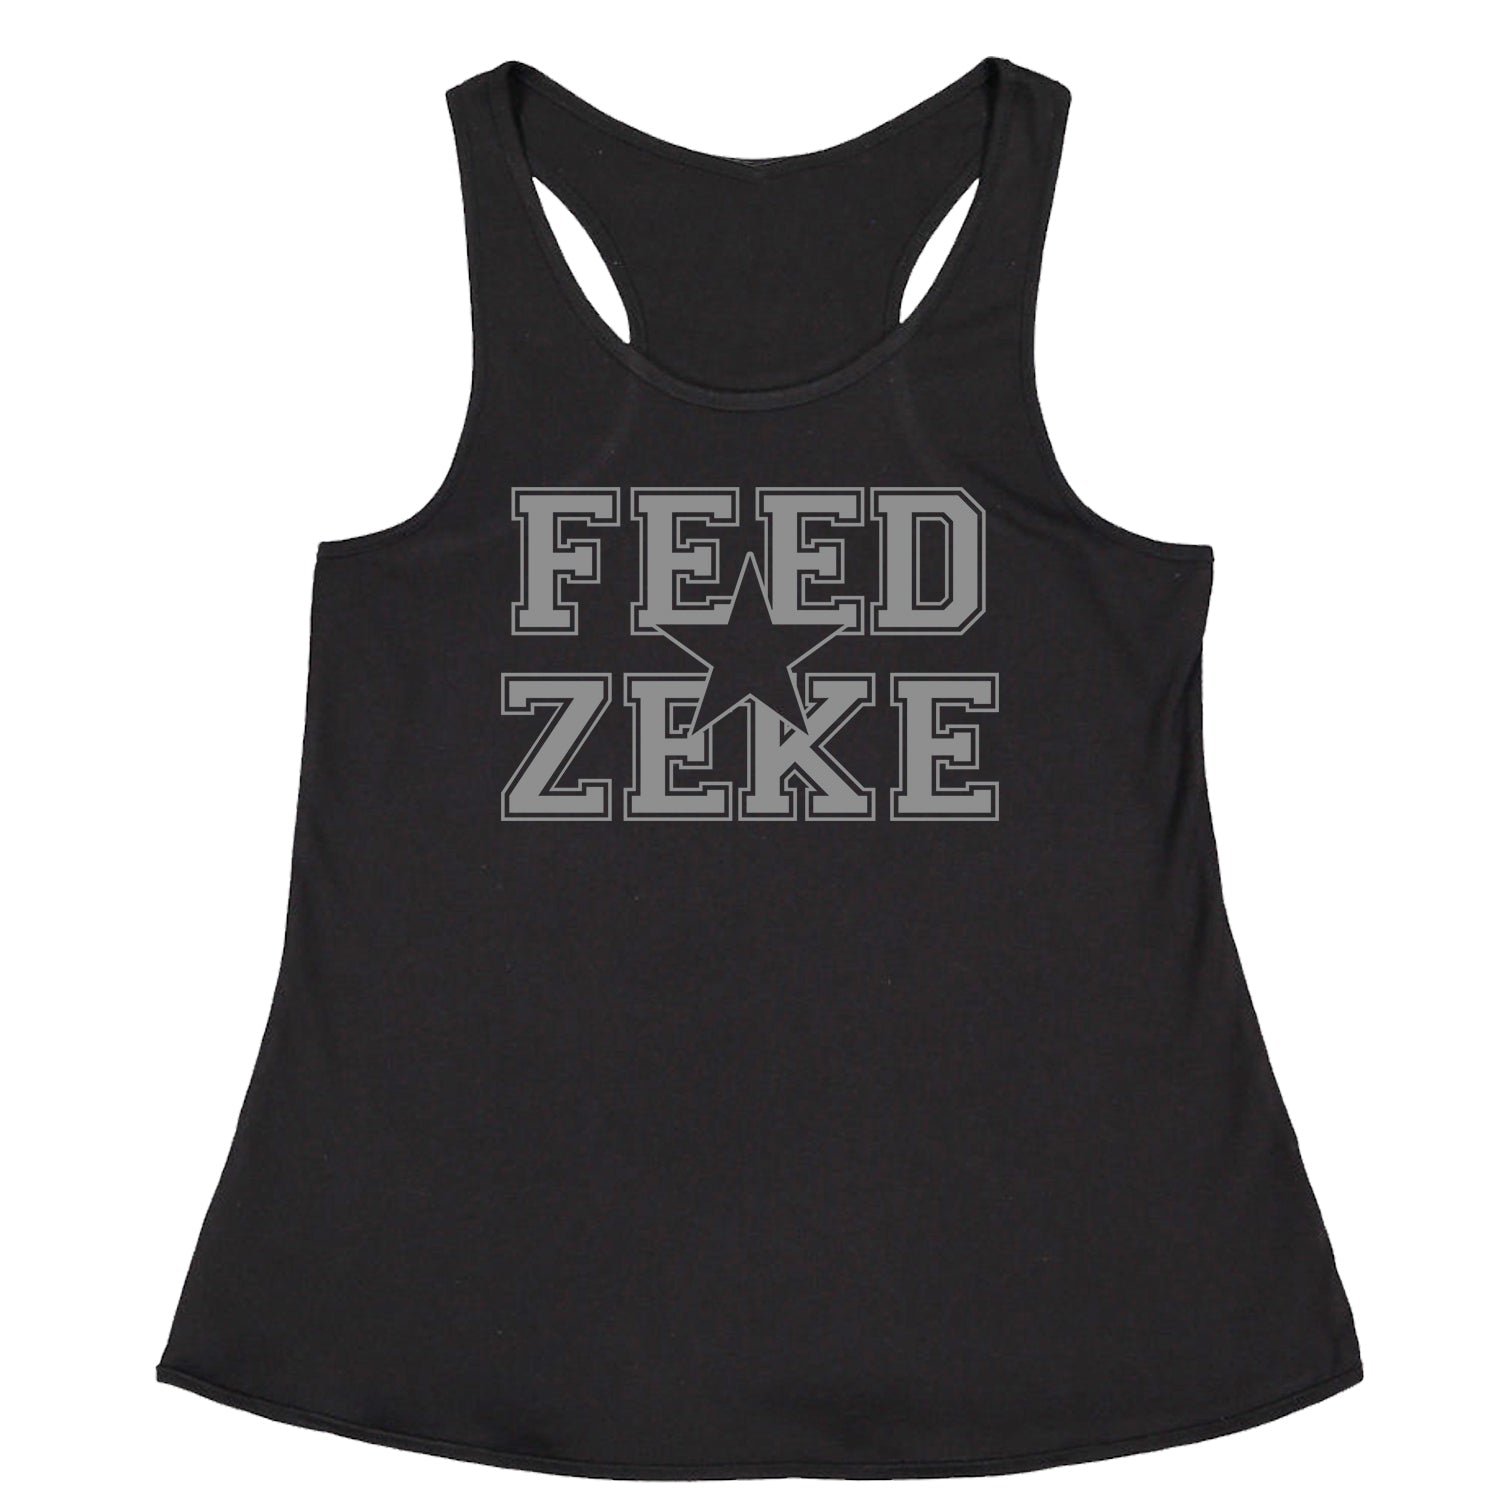 Feed Zeke Racerback Tank Top for Women #expressiontees by Expression Tees